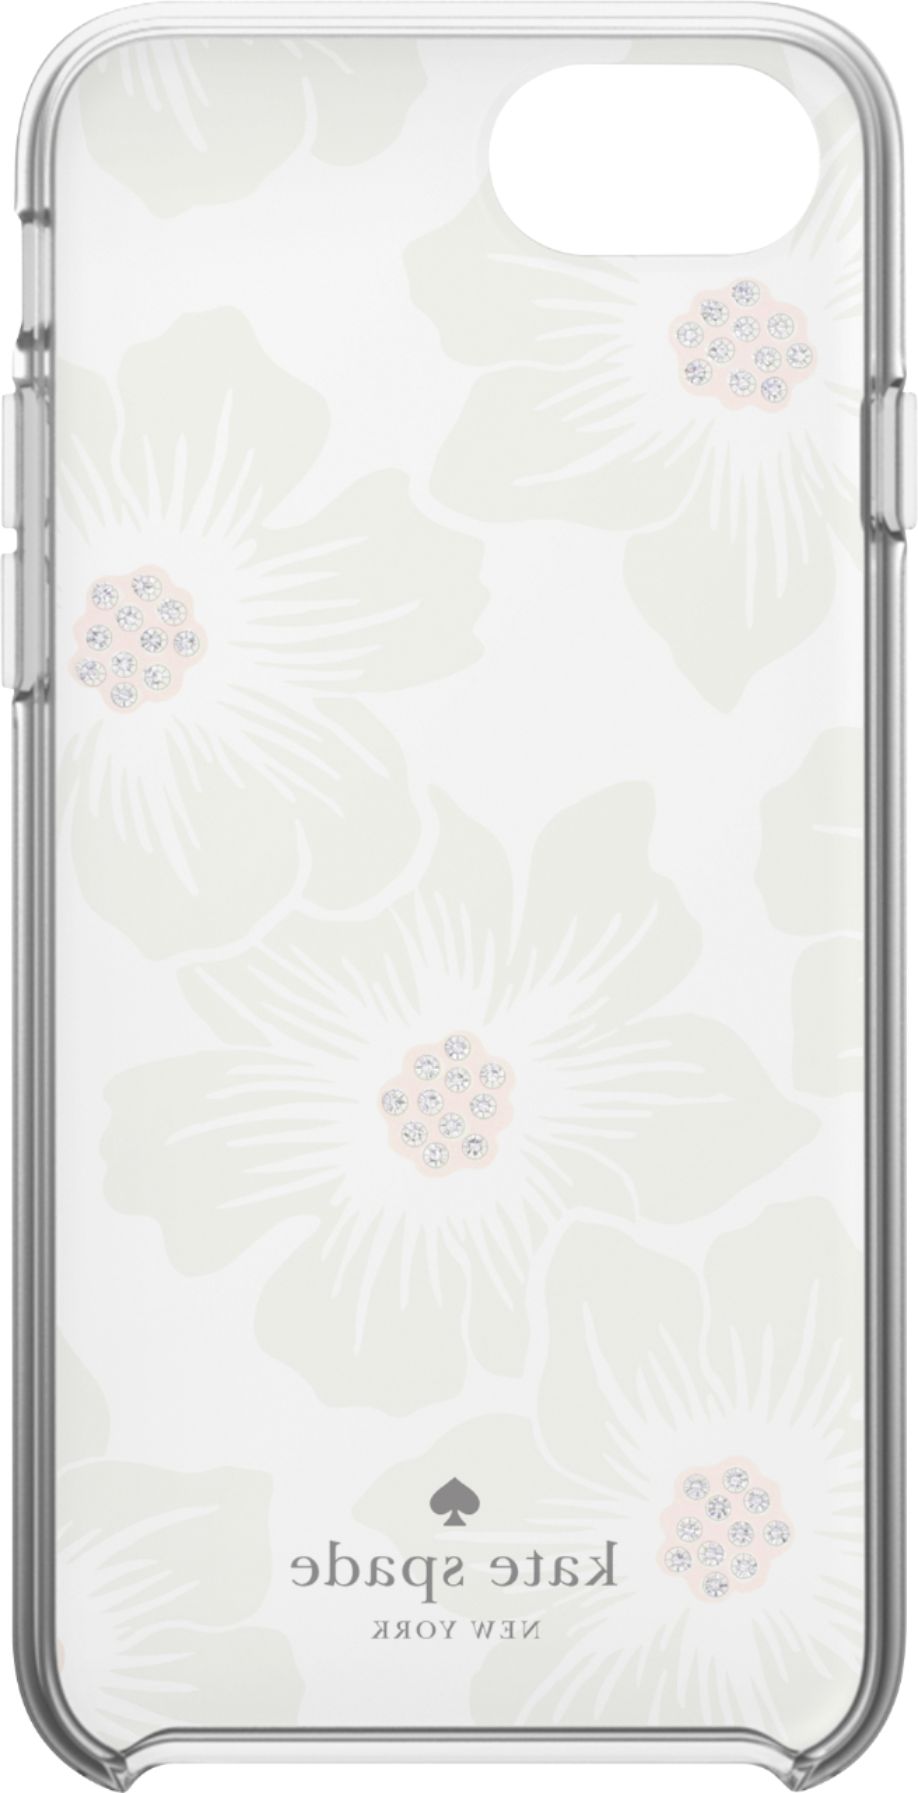 Kate Spade New York Protective Hardshell Case for iPhone 8 - Also Compatible with iPhone 7 - Hollyhock Floral Clear / Cream with Stones